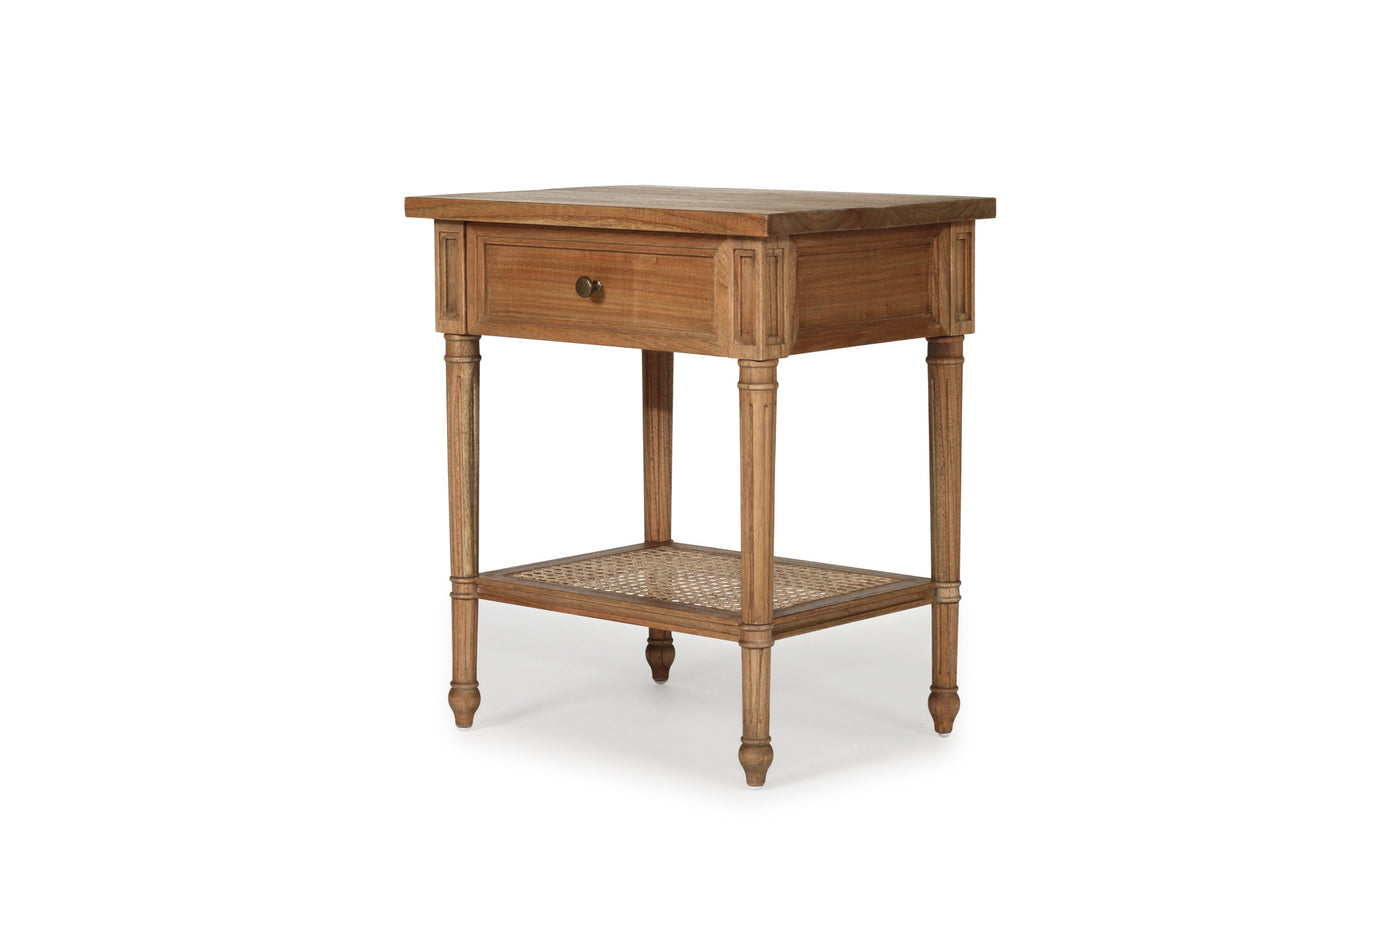 Daydream Cane Bedside Table - Weathered Oak